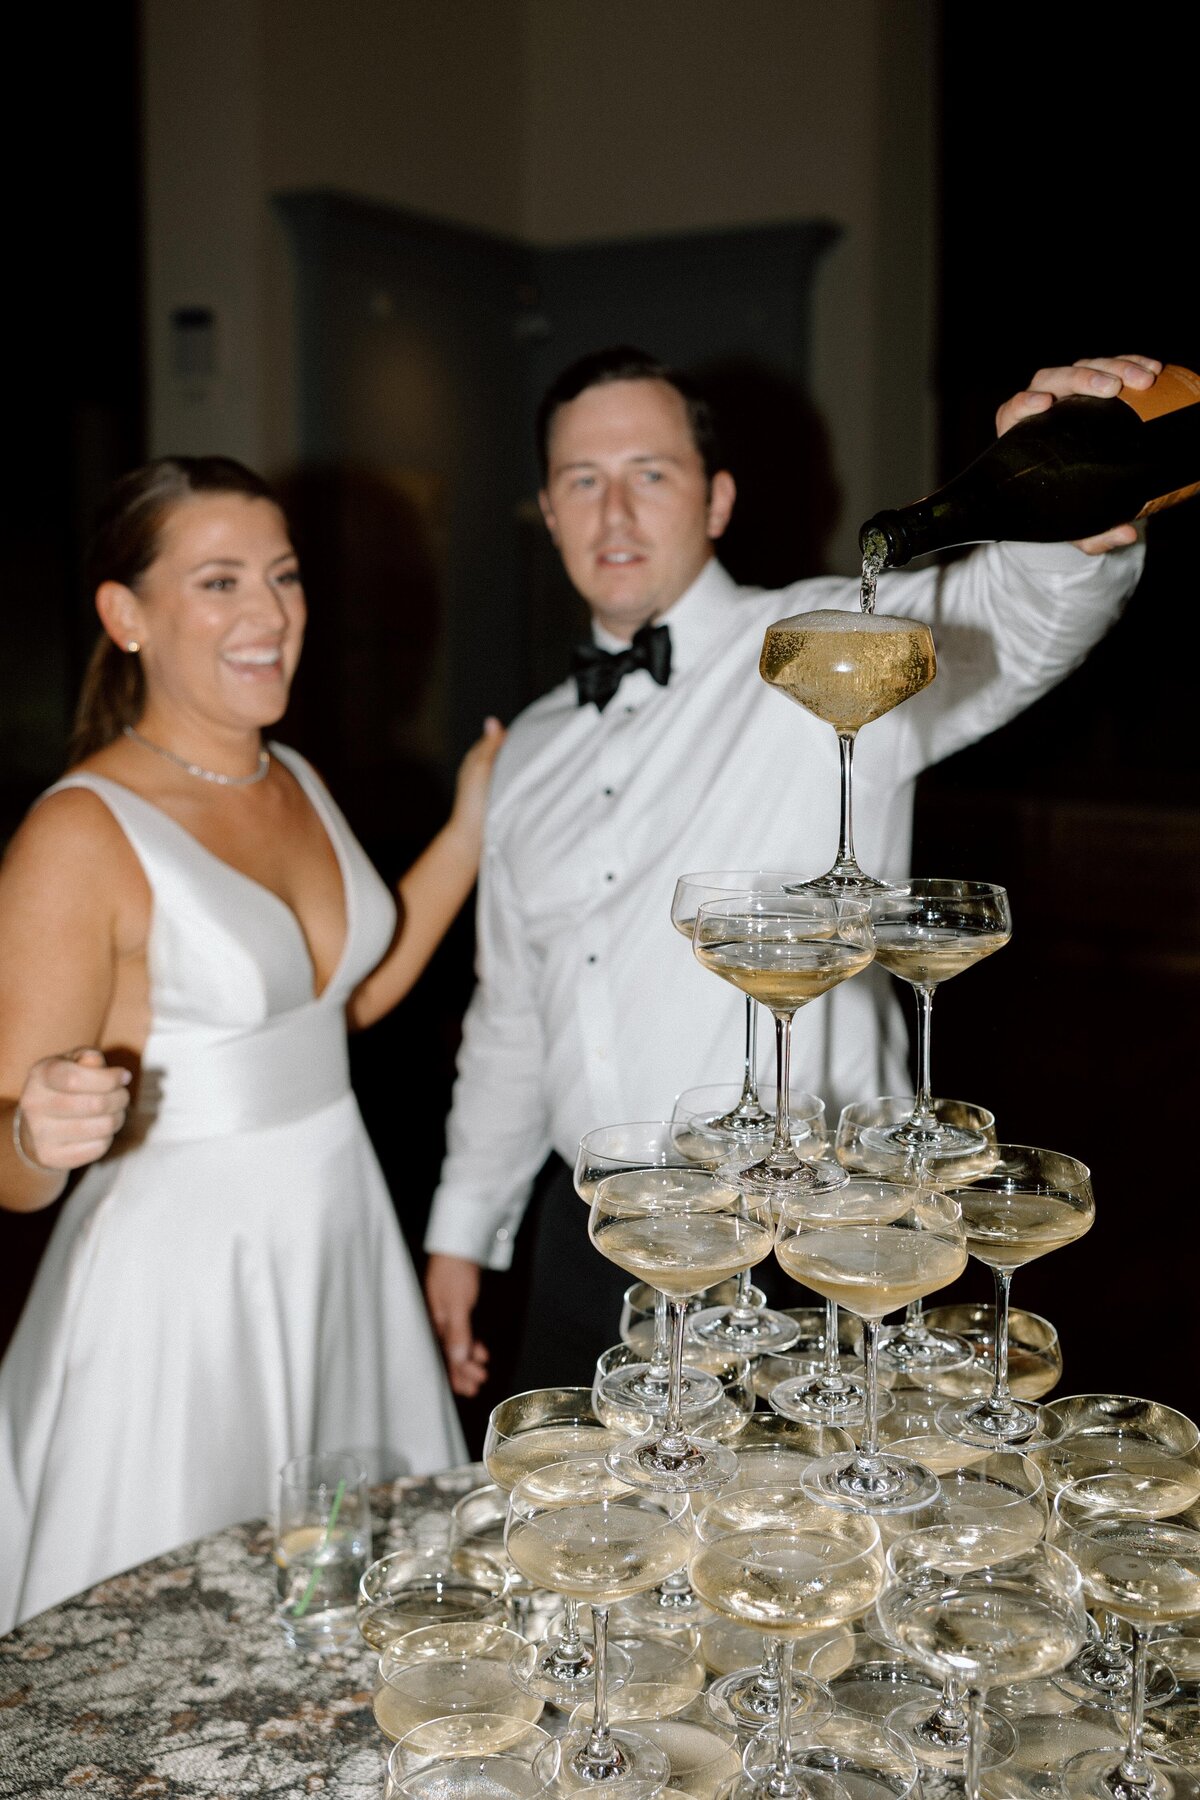 Event-Planning-DC-Wedding-Baltimore-Champagne-Tower-George-Peabody-Library-Bride-&-Groom-Anna-Lowe-Photography